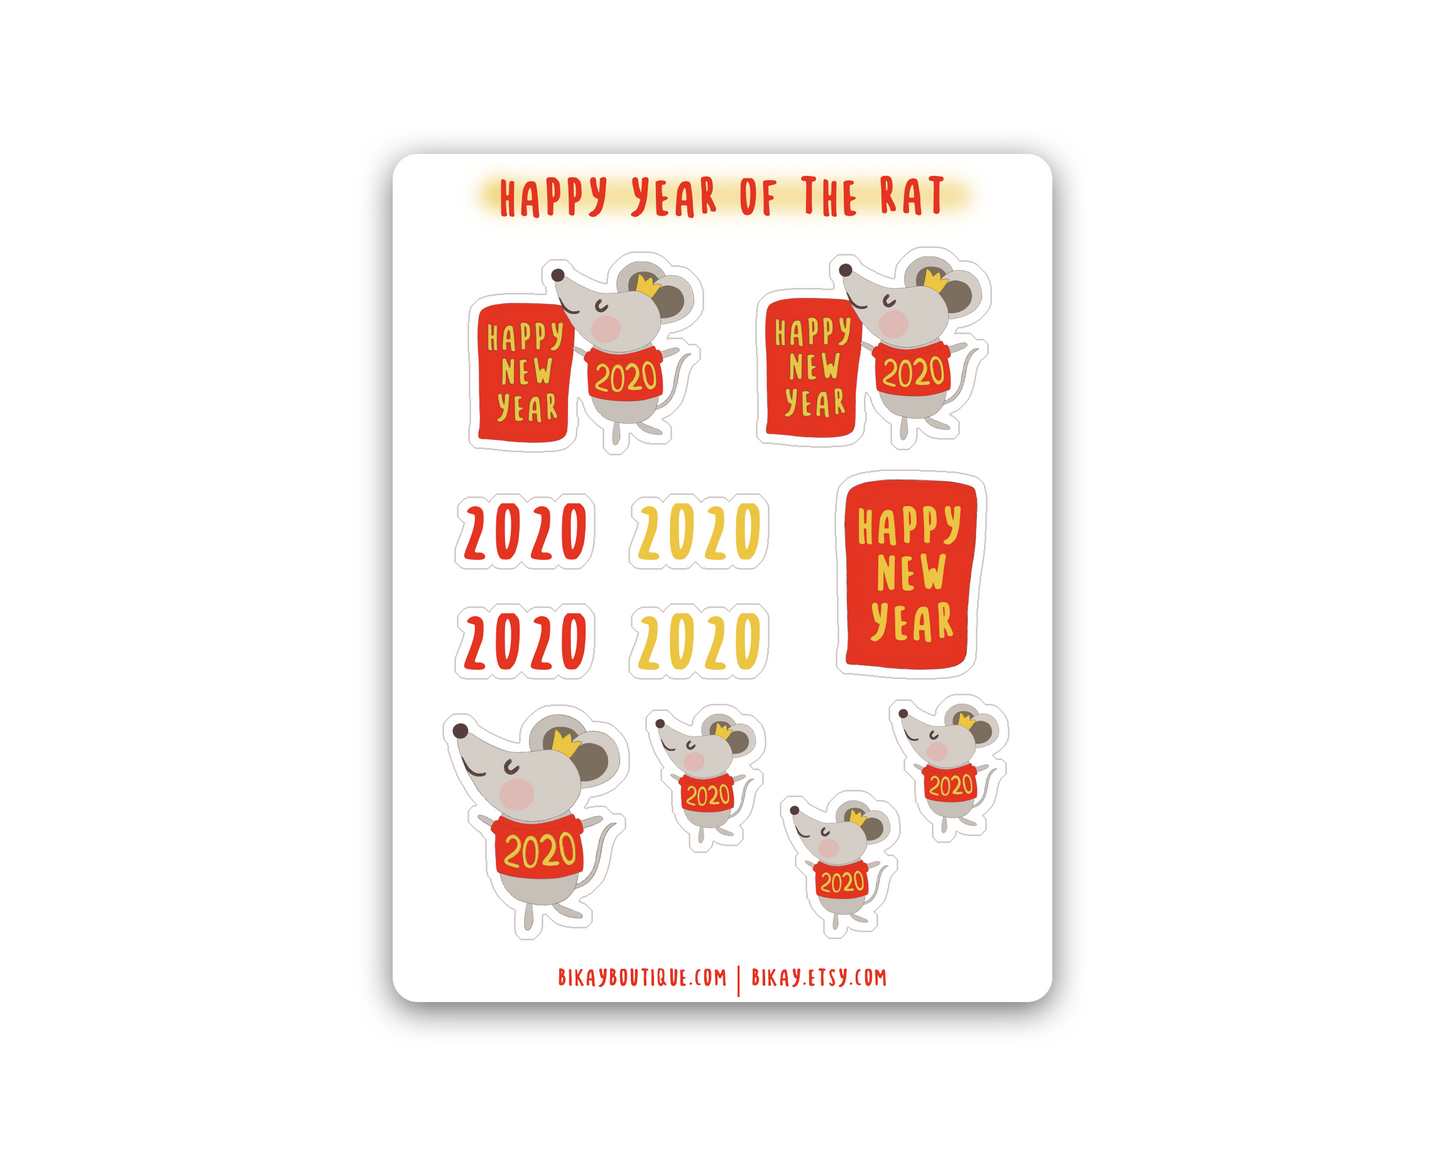 Lunar new year sticker sheet, lunar new year, happy new year stickers, year of the rat